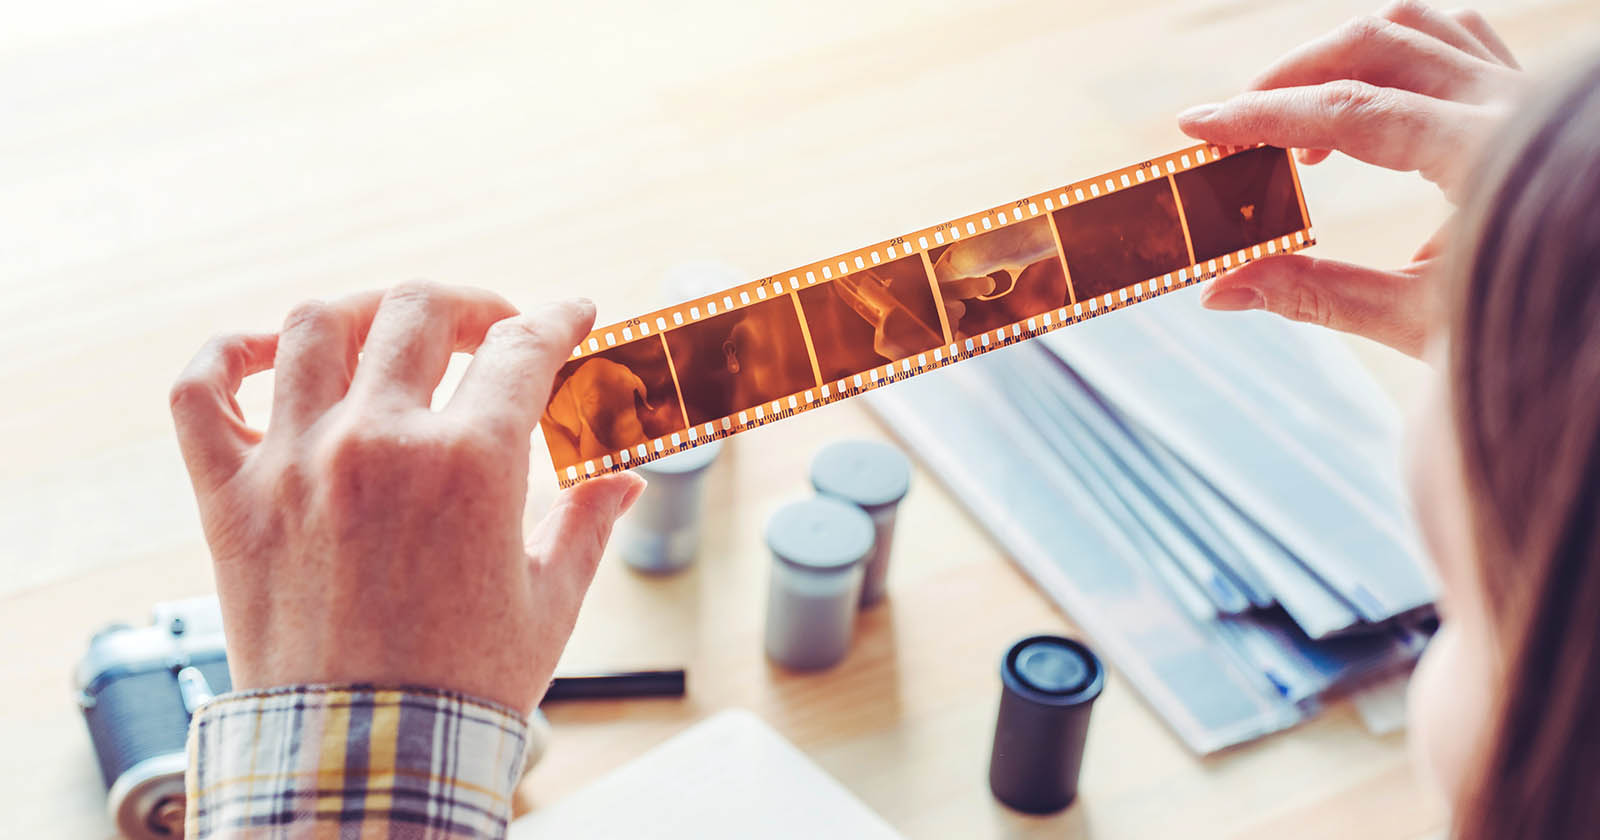 35 Filmmaking Items That You Can Get from the Dollar Store